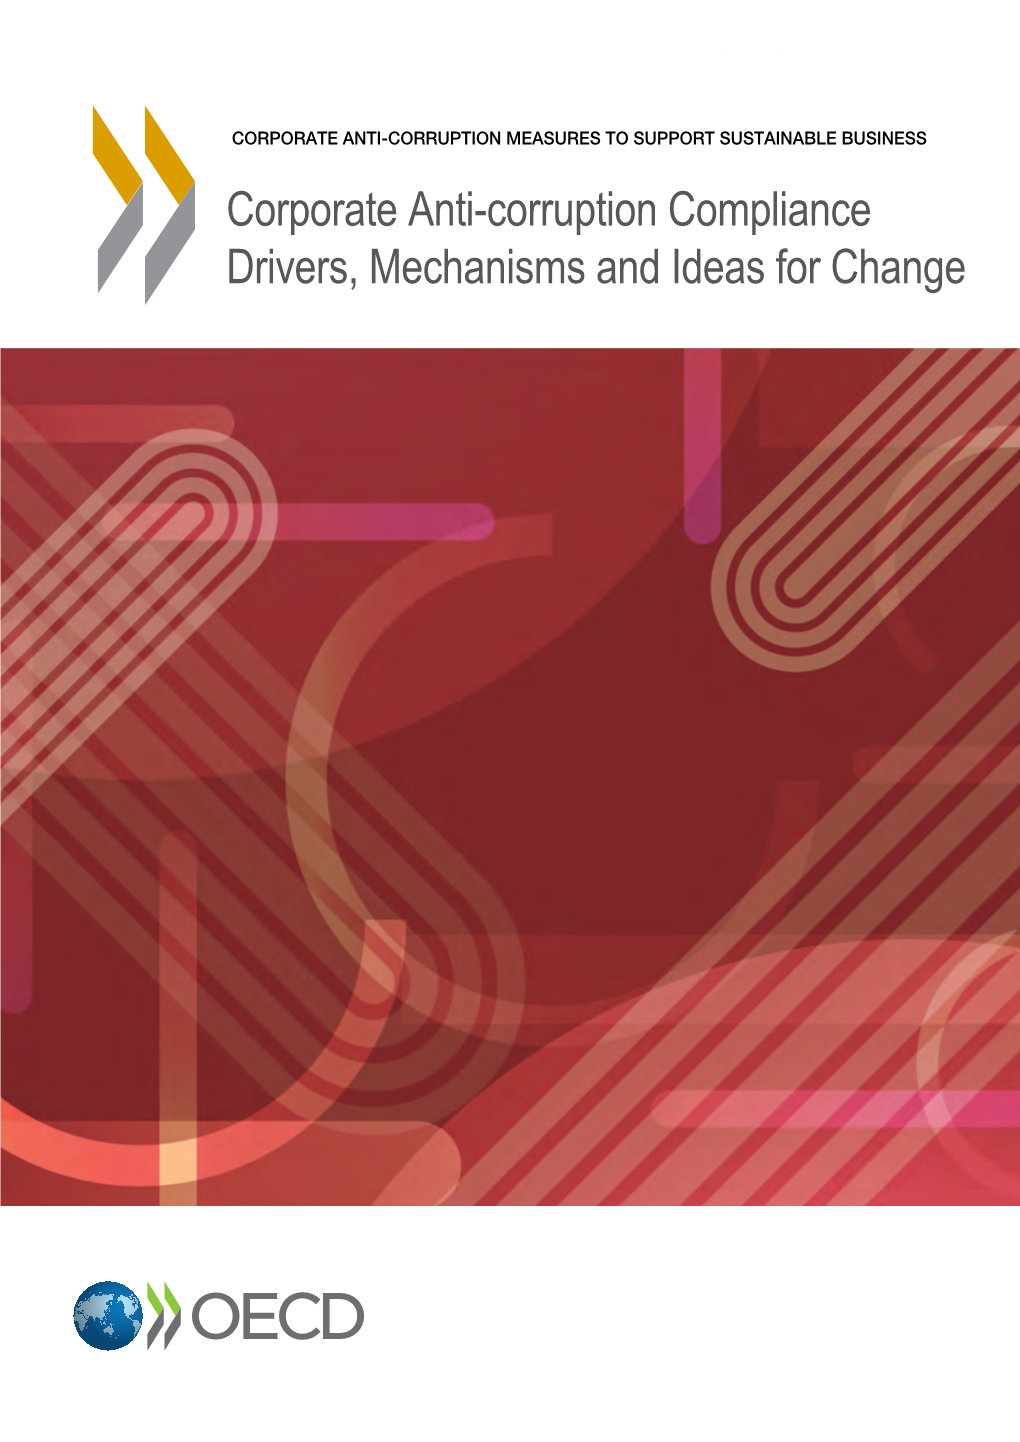 Corporate Anti-Corruption Compliance Drivers, Mechanisms and Ideas for Change